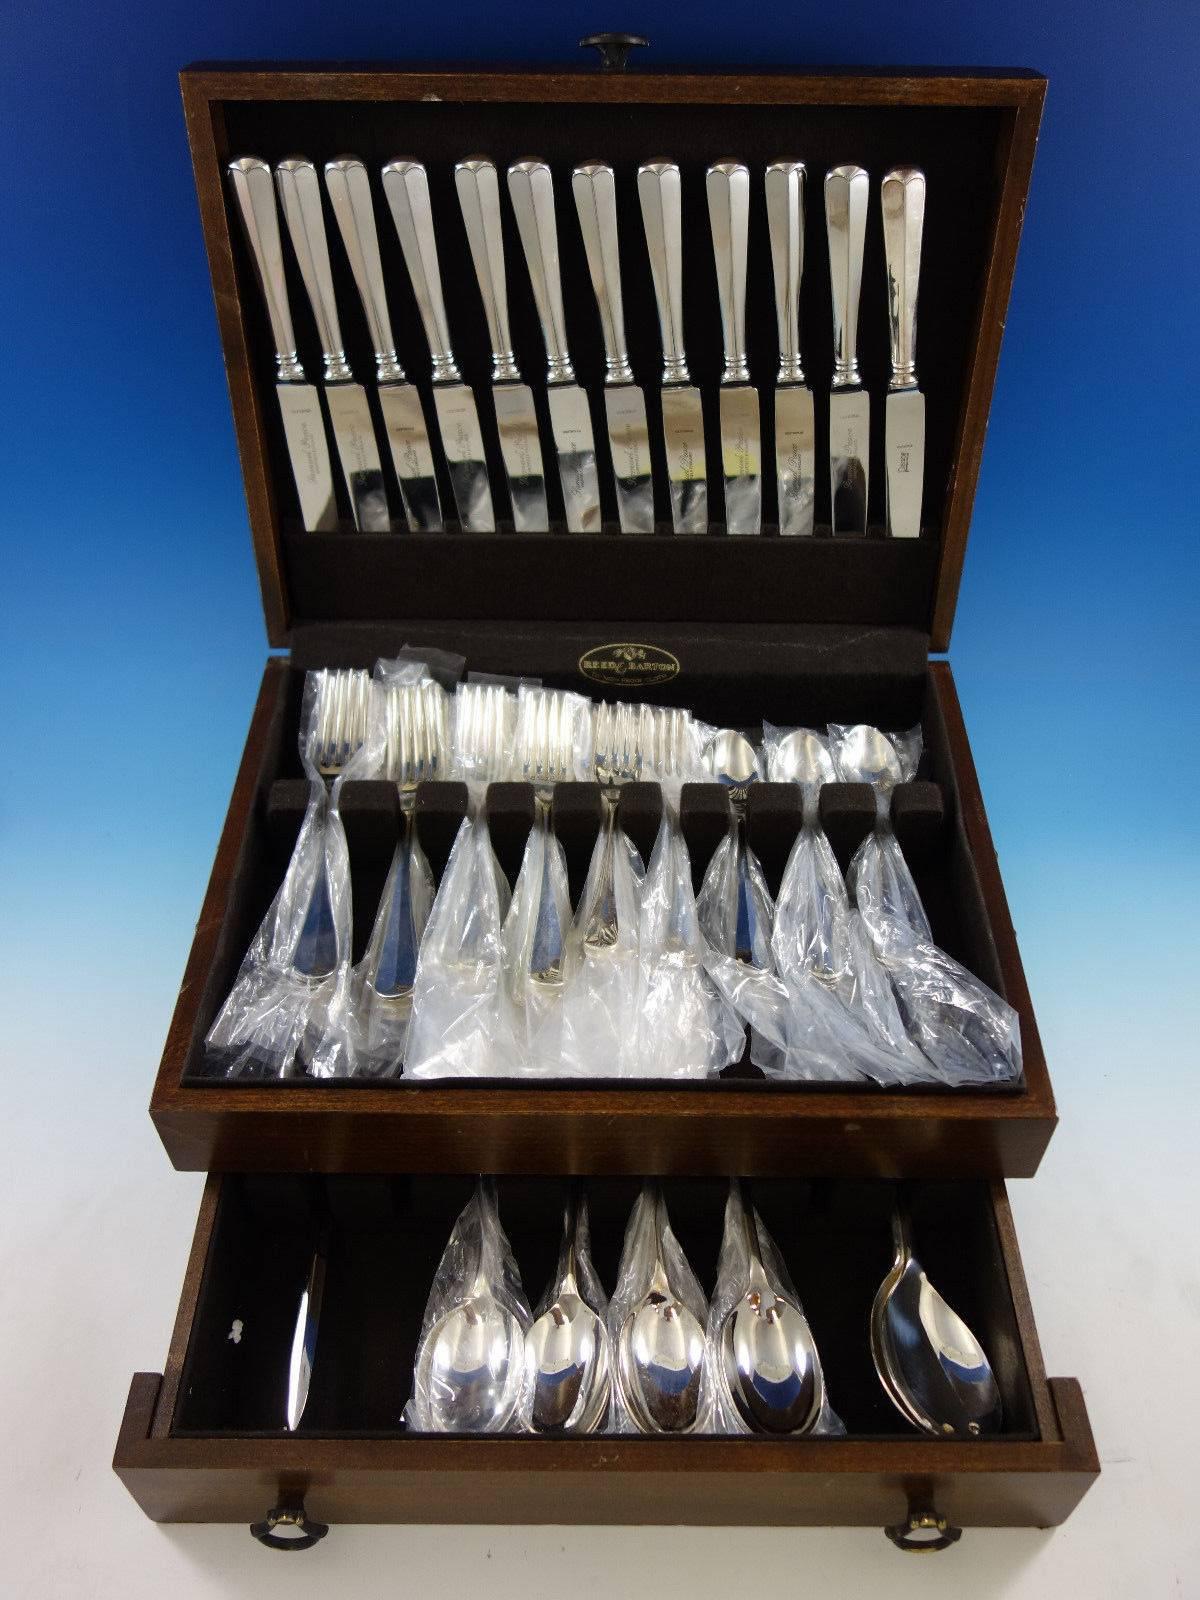 Queen Anne/Rattail English silver plated & 18/10 stainless flatware set (mixed) by Cooper Bros & Sons & Samuel Peace, 77 pieces. This set includes: 

12 knives, 9 3/8